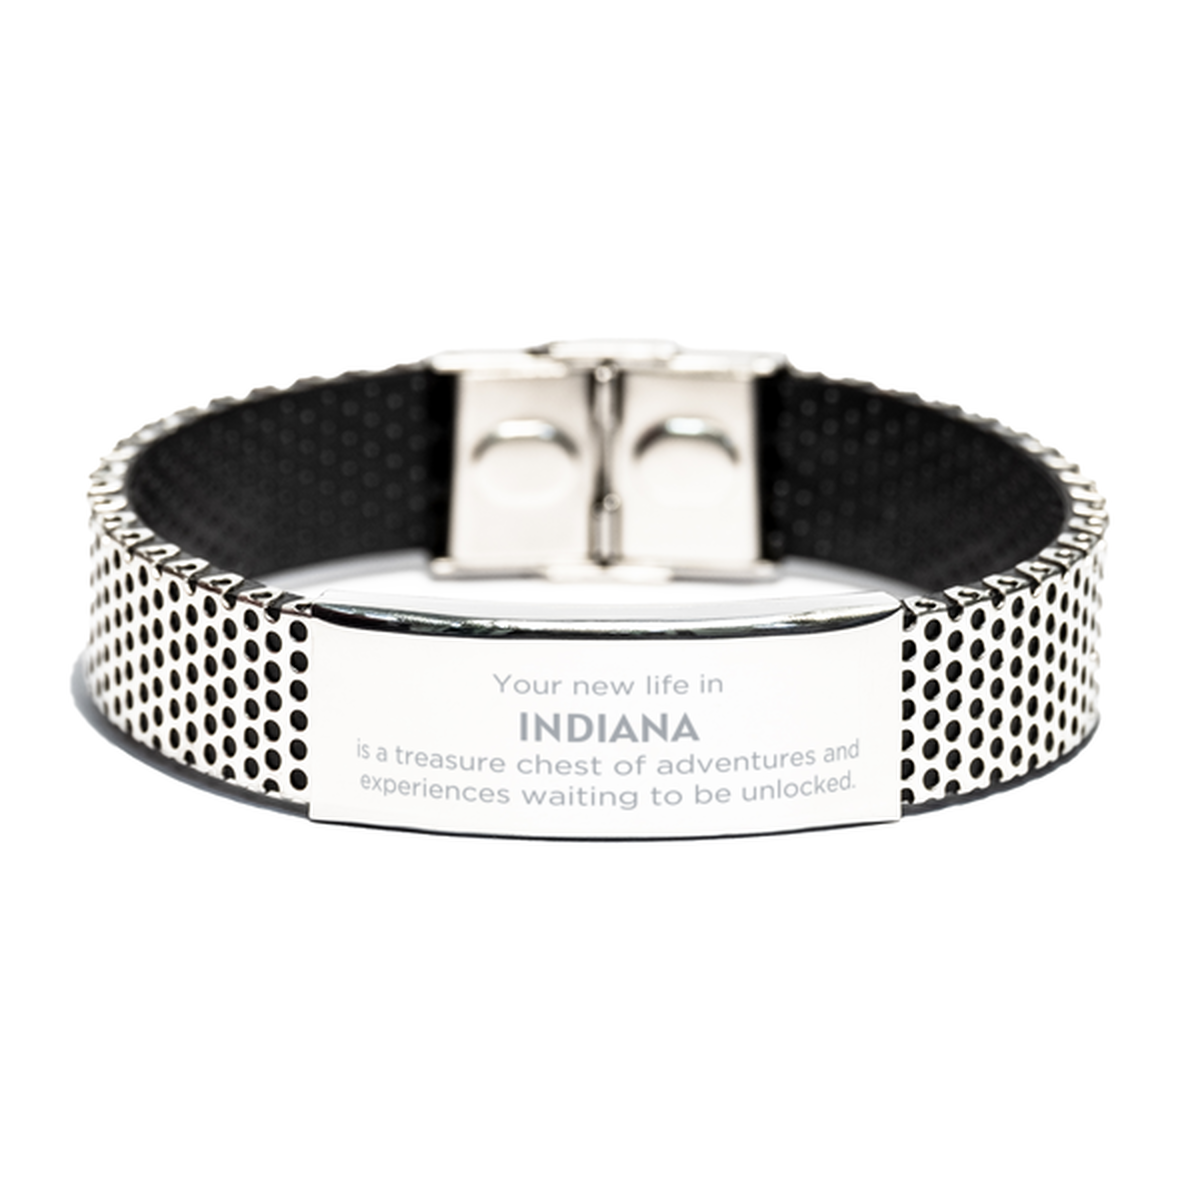 Moving to Indiana Gifts, Your new life in Indiana, Long Distance Indiana Christmas Stainless Steel Bracelet For Men, Women, Friends, Coworkers